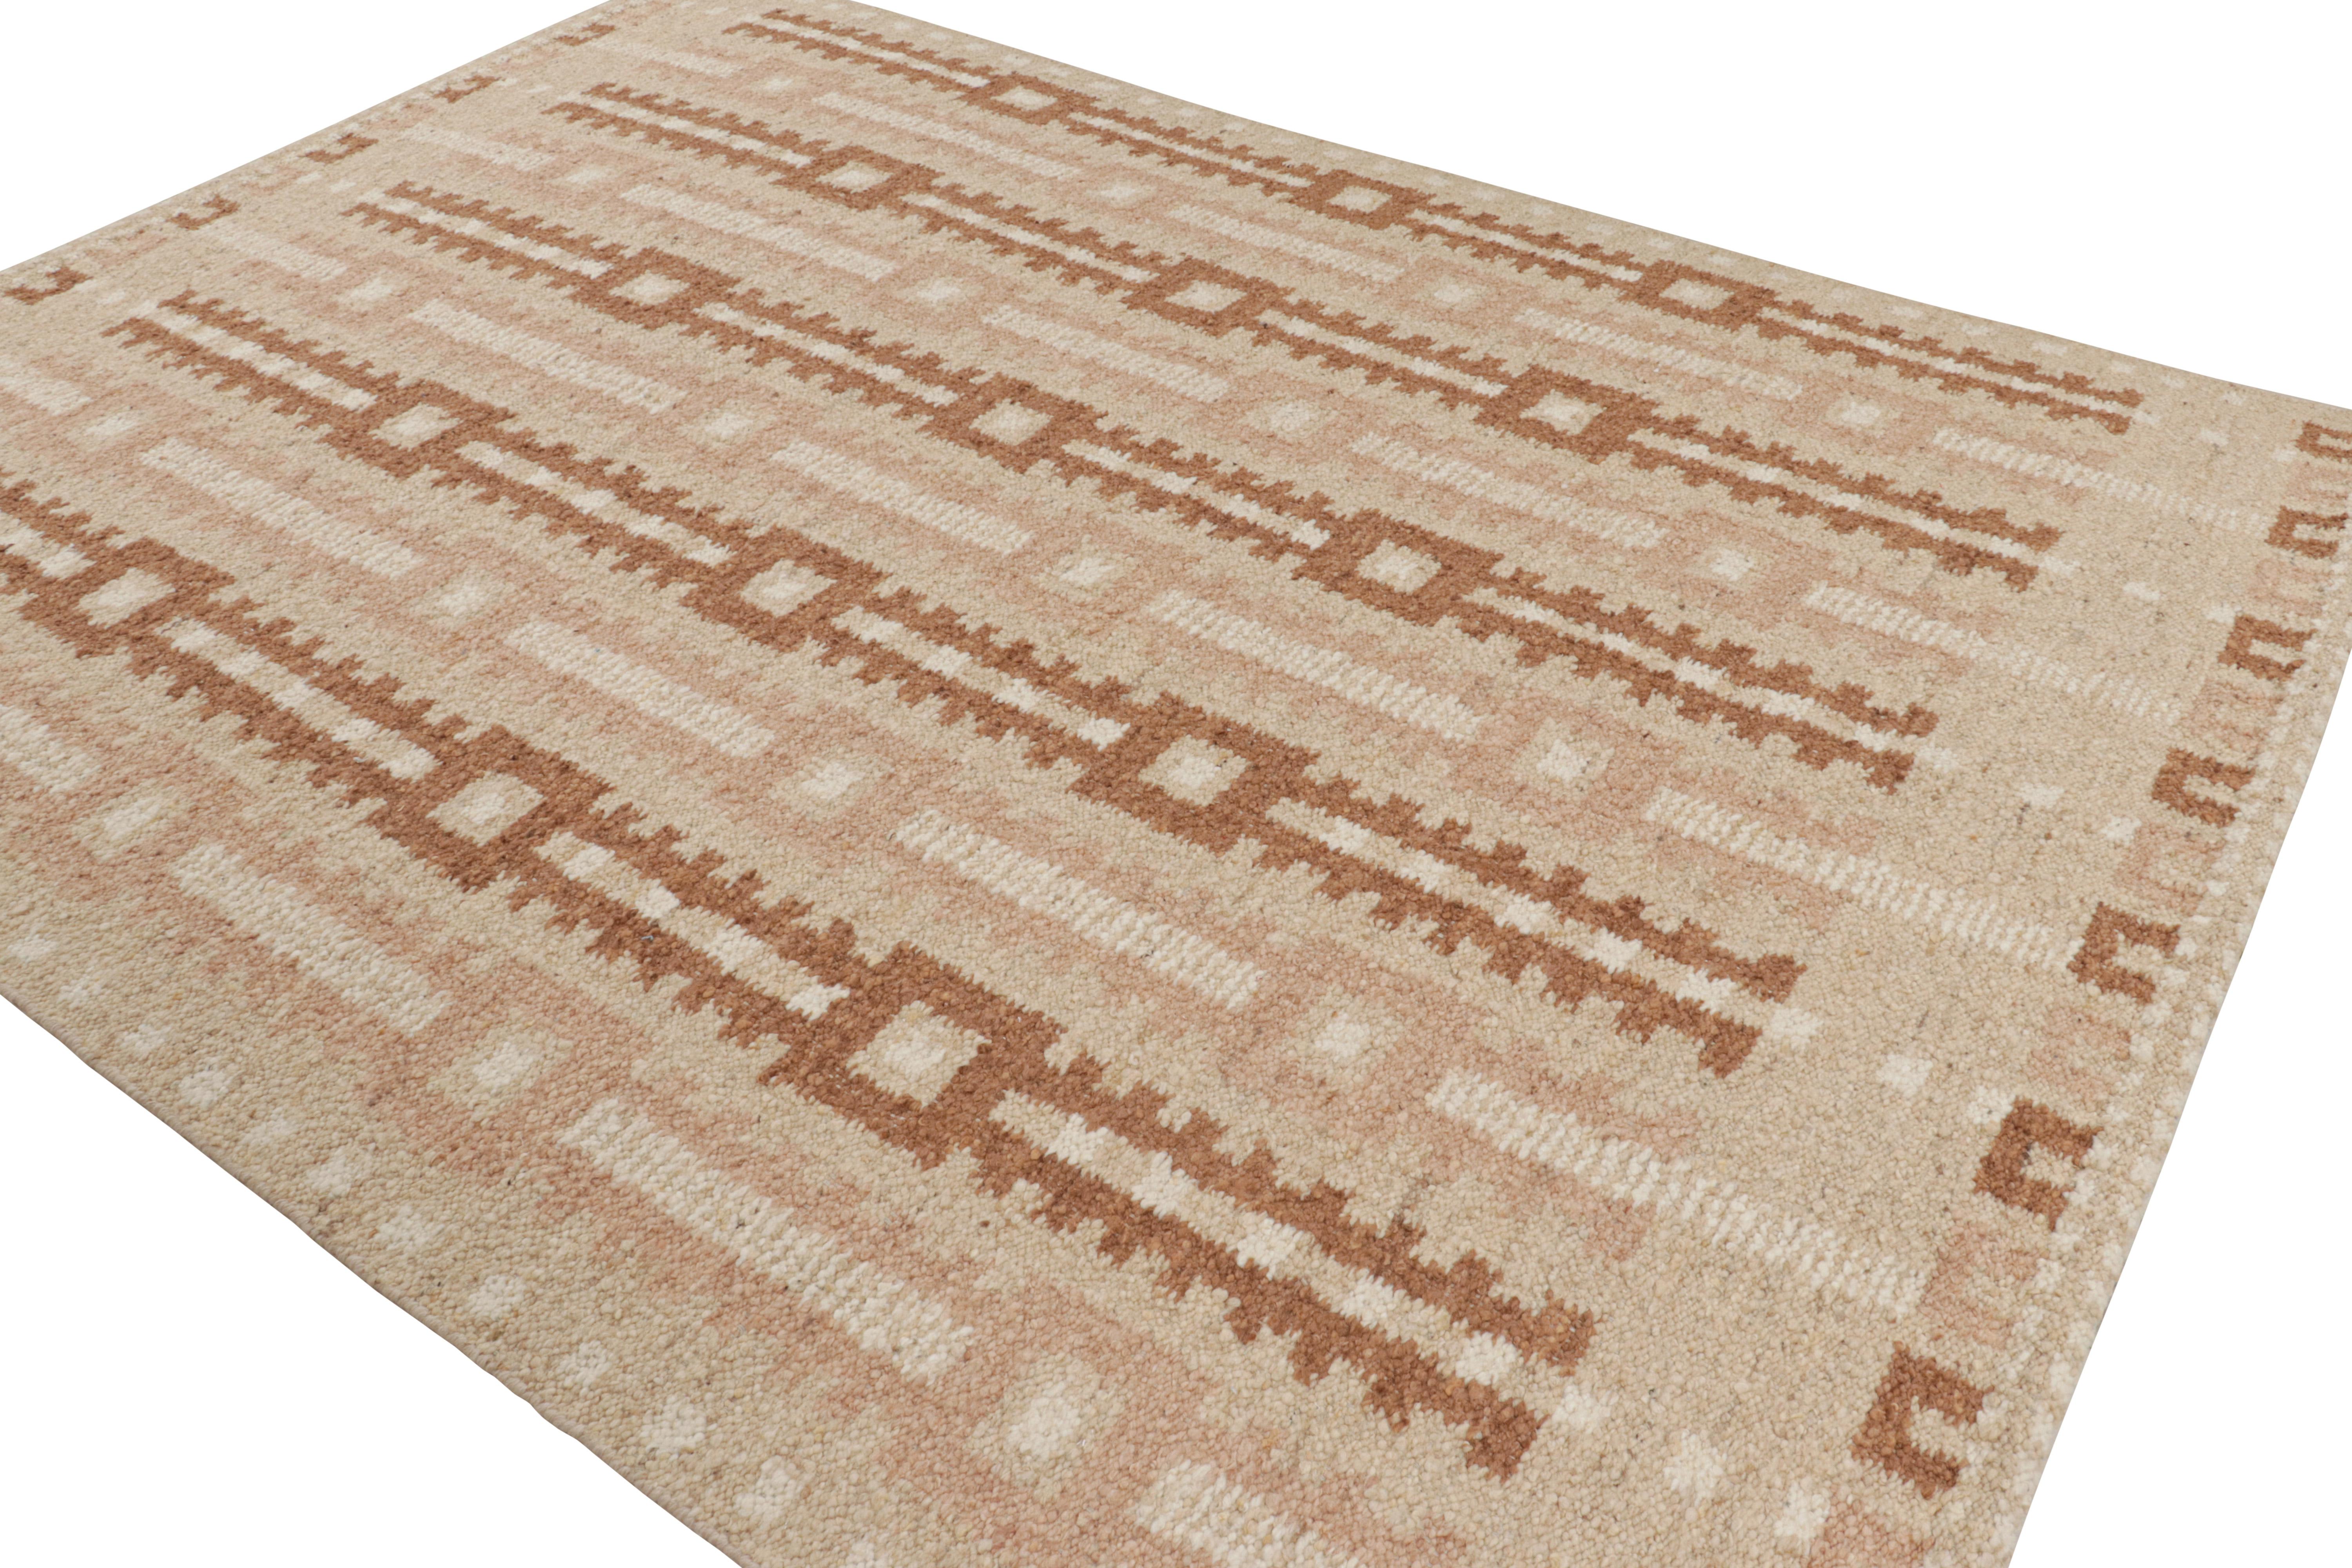 Indian Rug & Kilim’s Scandinavian Style Rug with Pink, White and Beige-Brown Patterns For Sale